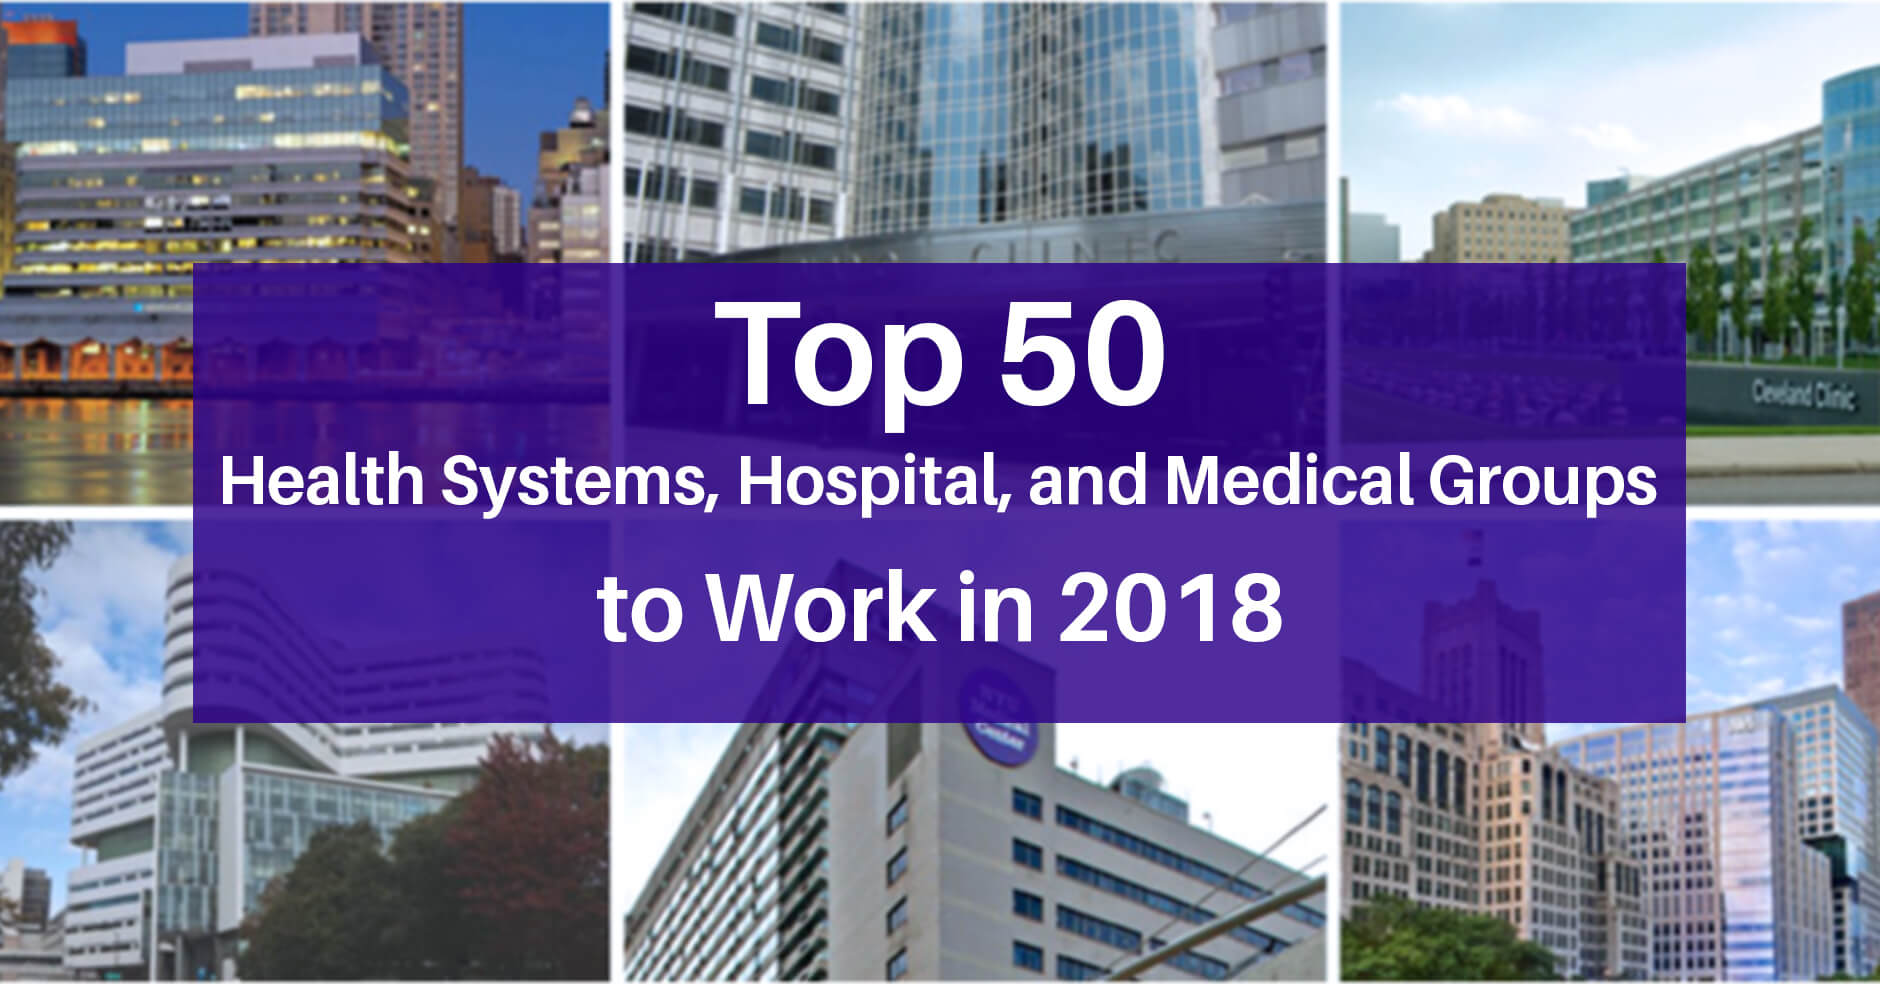 Top 50 Health Systems, Hospital, and Medical Groups to Work in 2018